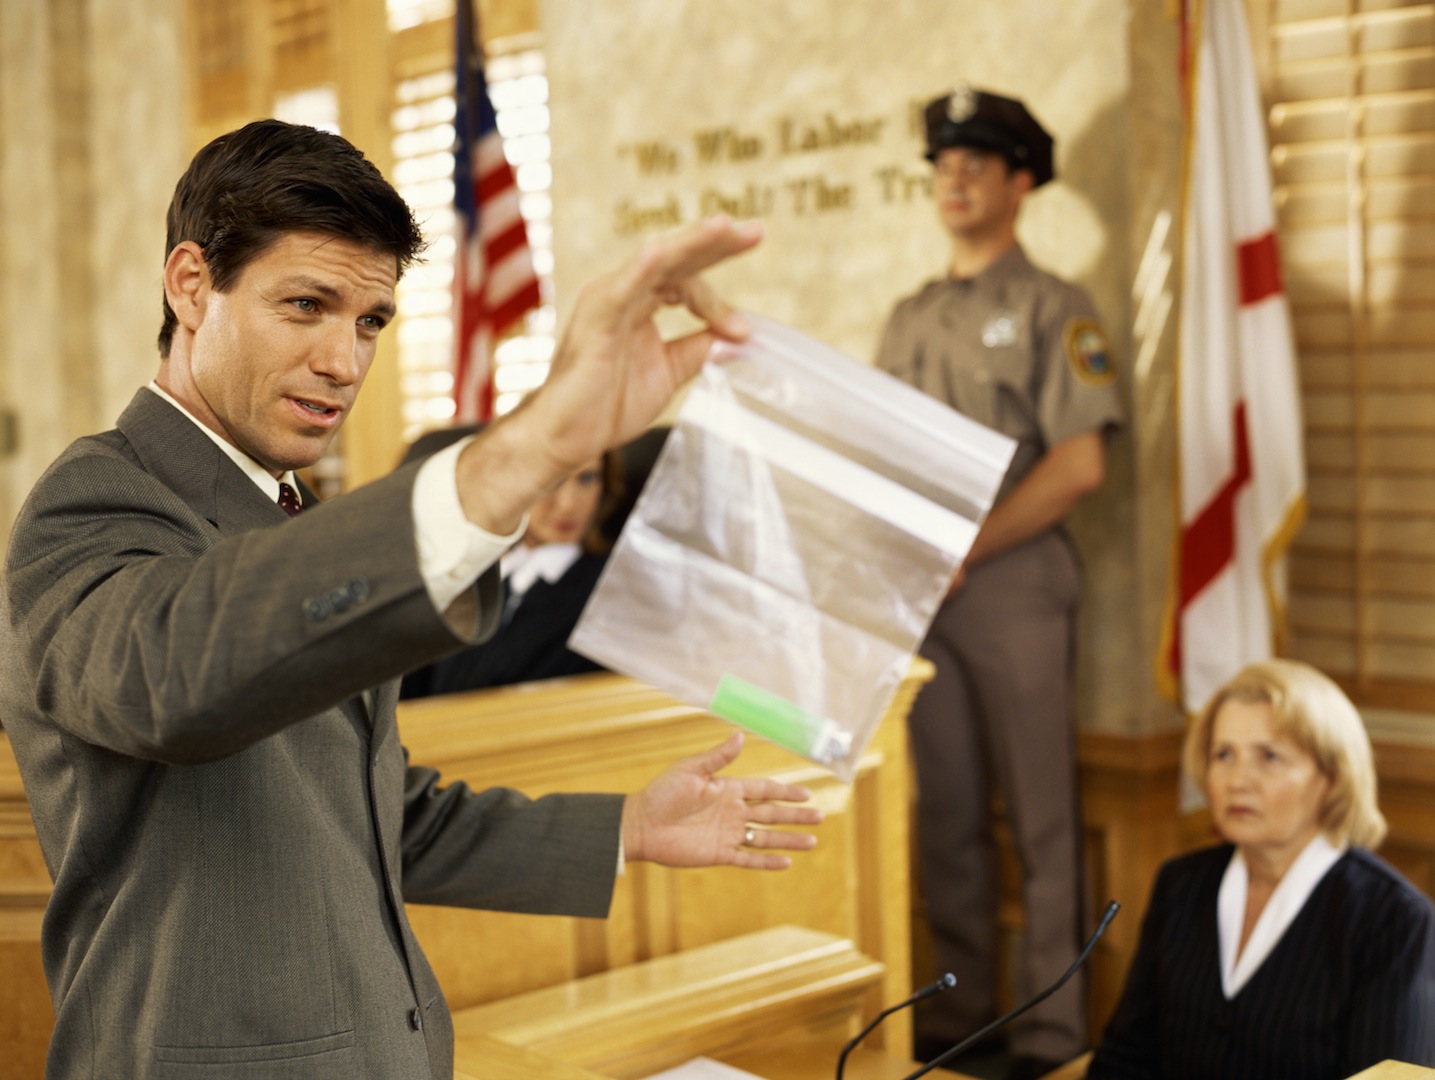 Male lawyer displaying evidence to jury — Winning Trial Advocacy ...